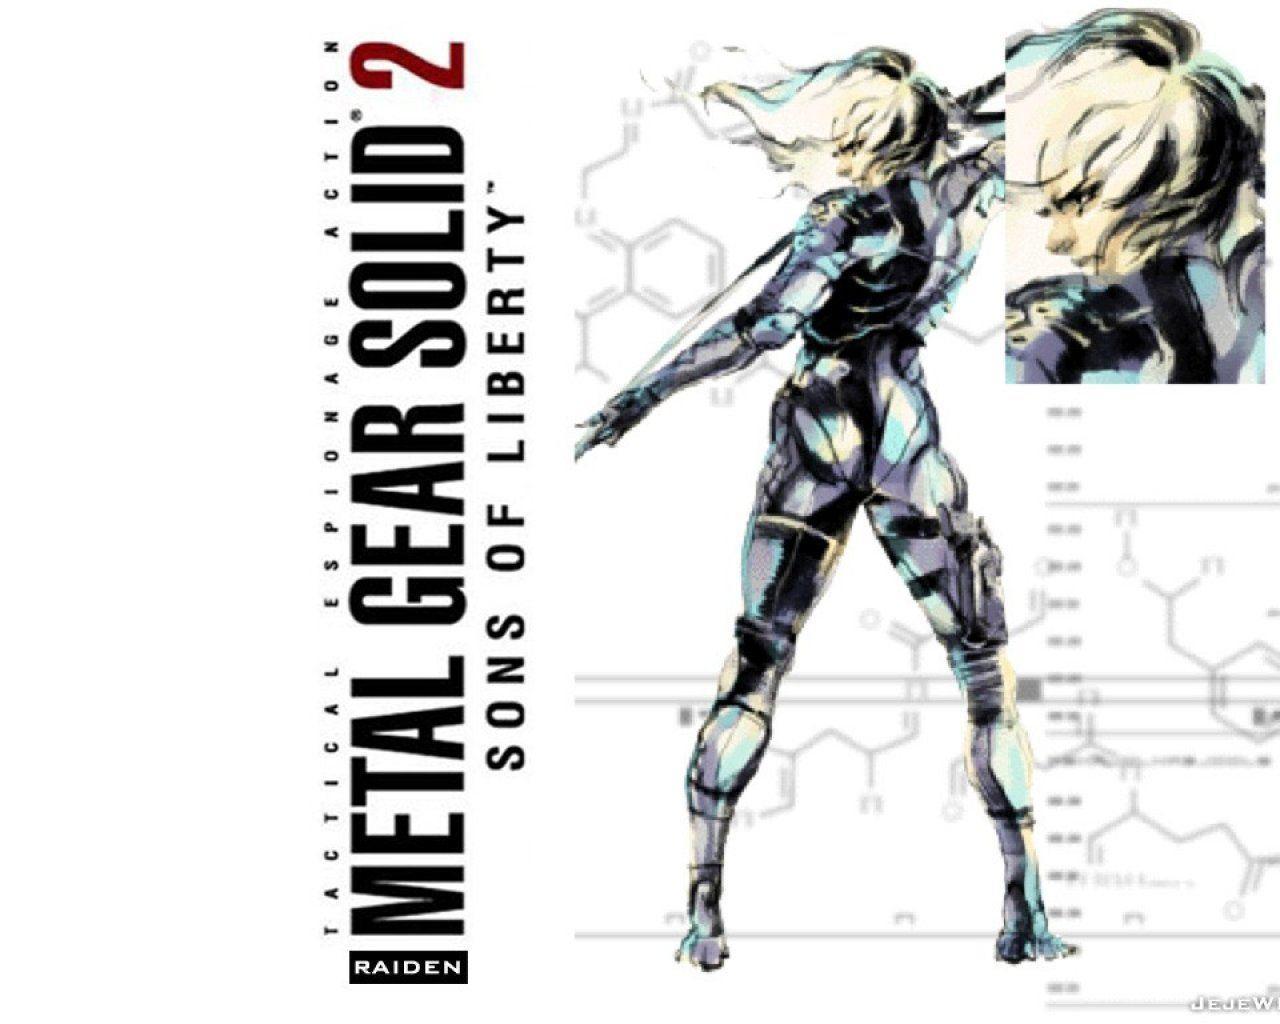 Metal Gear Solid 2: Sons Of Liberty Wallpapers